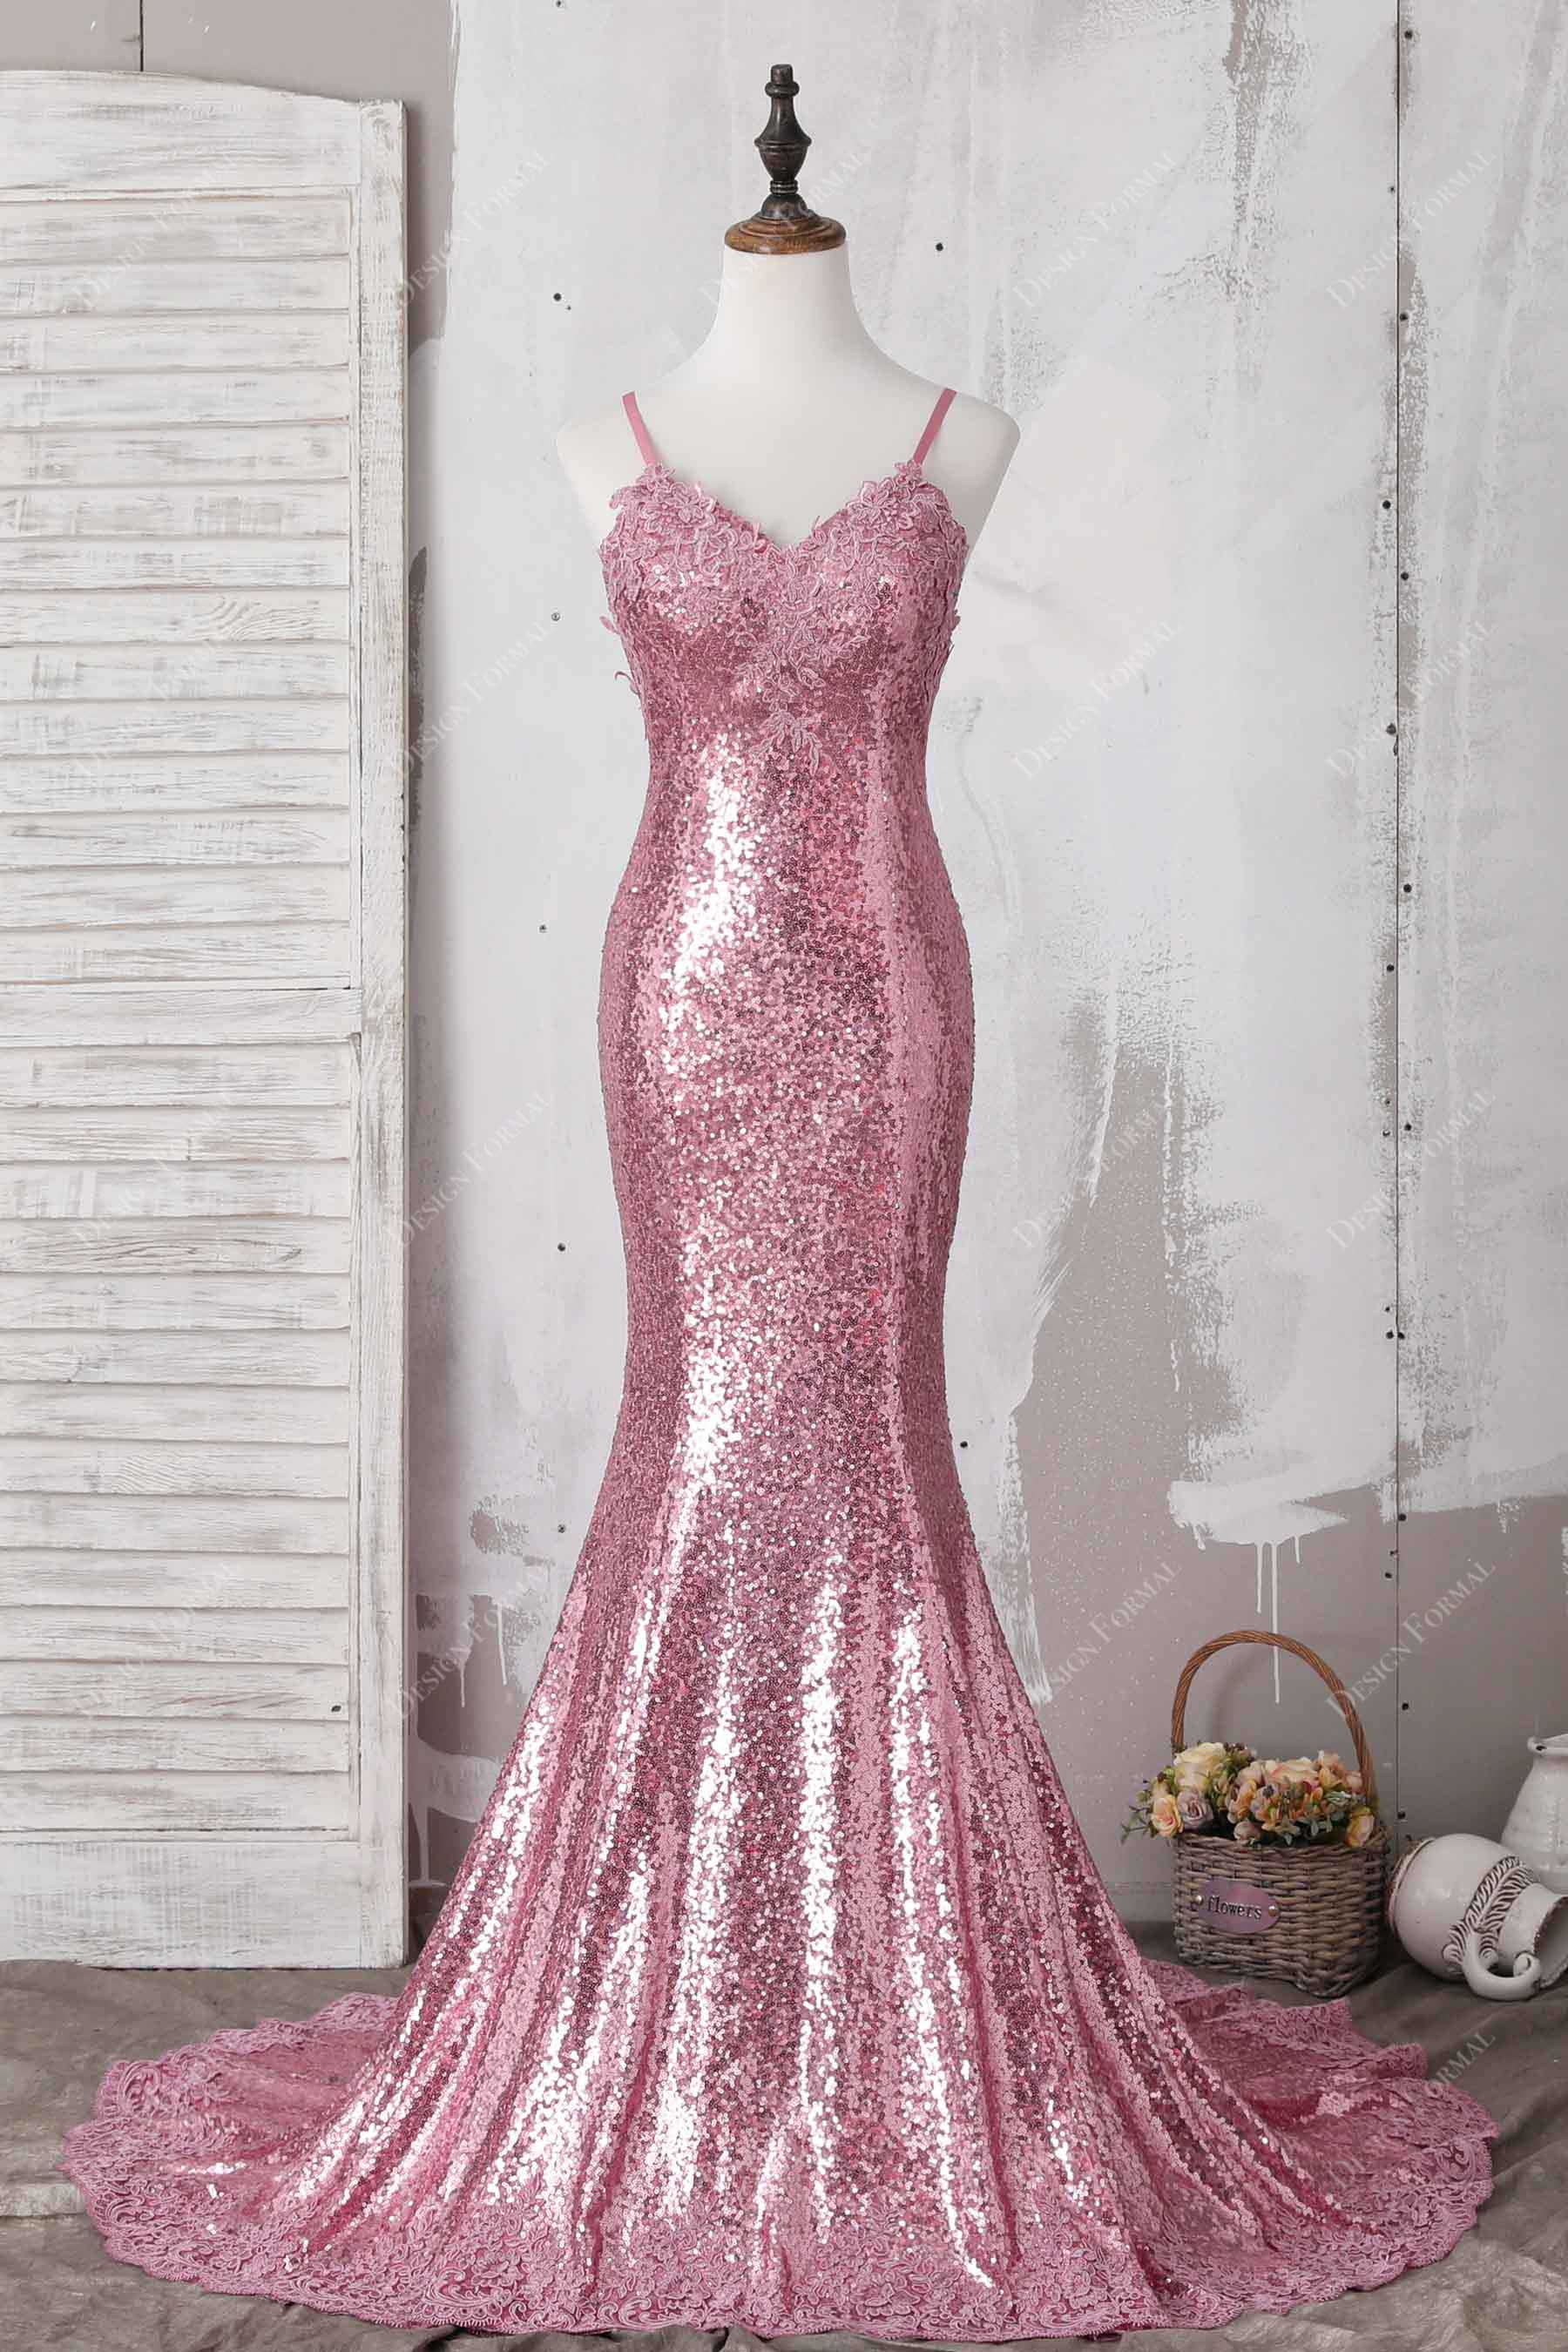 Pink Lace Sparkly Sequin Mermaid Prom Dress